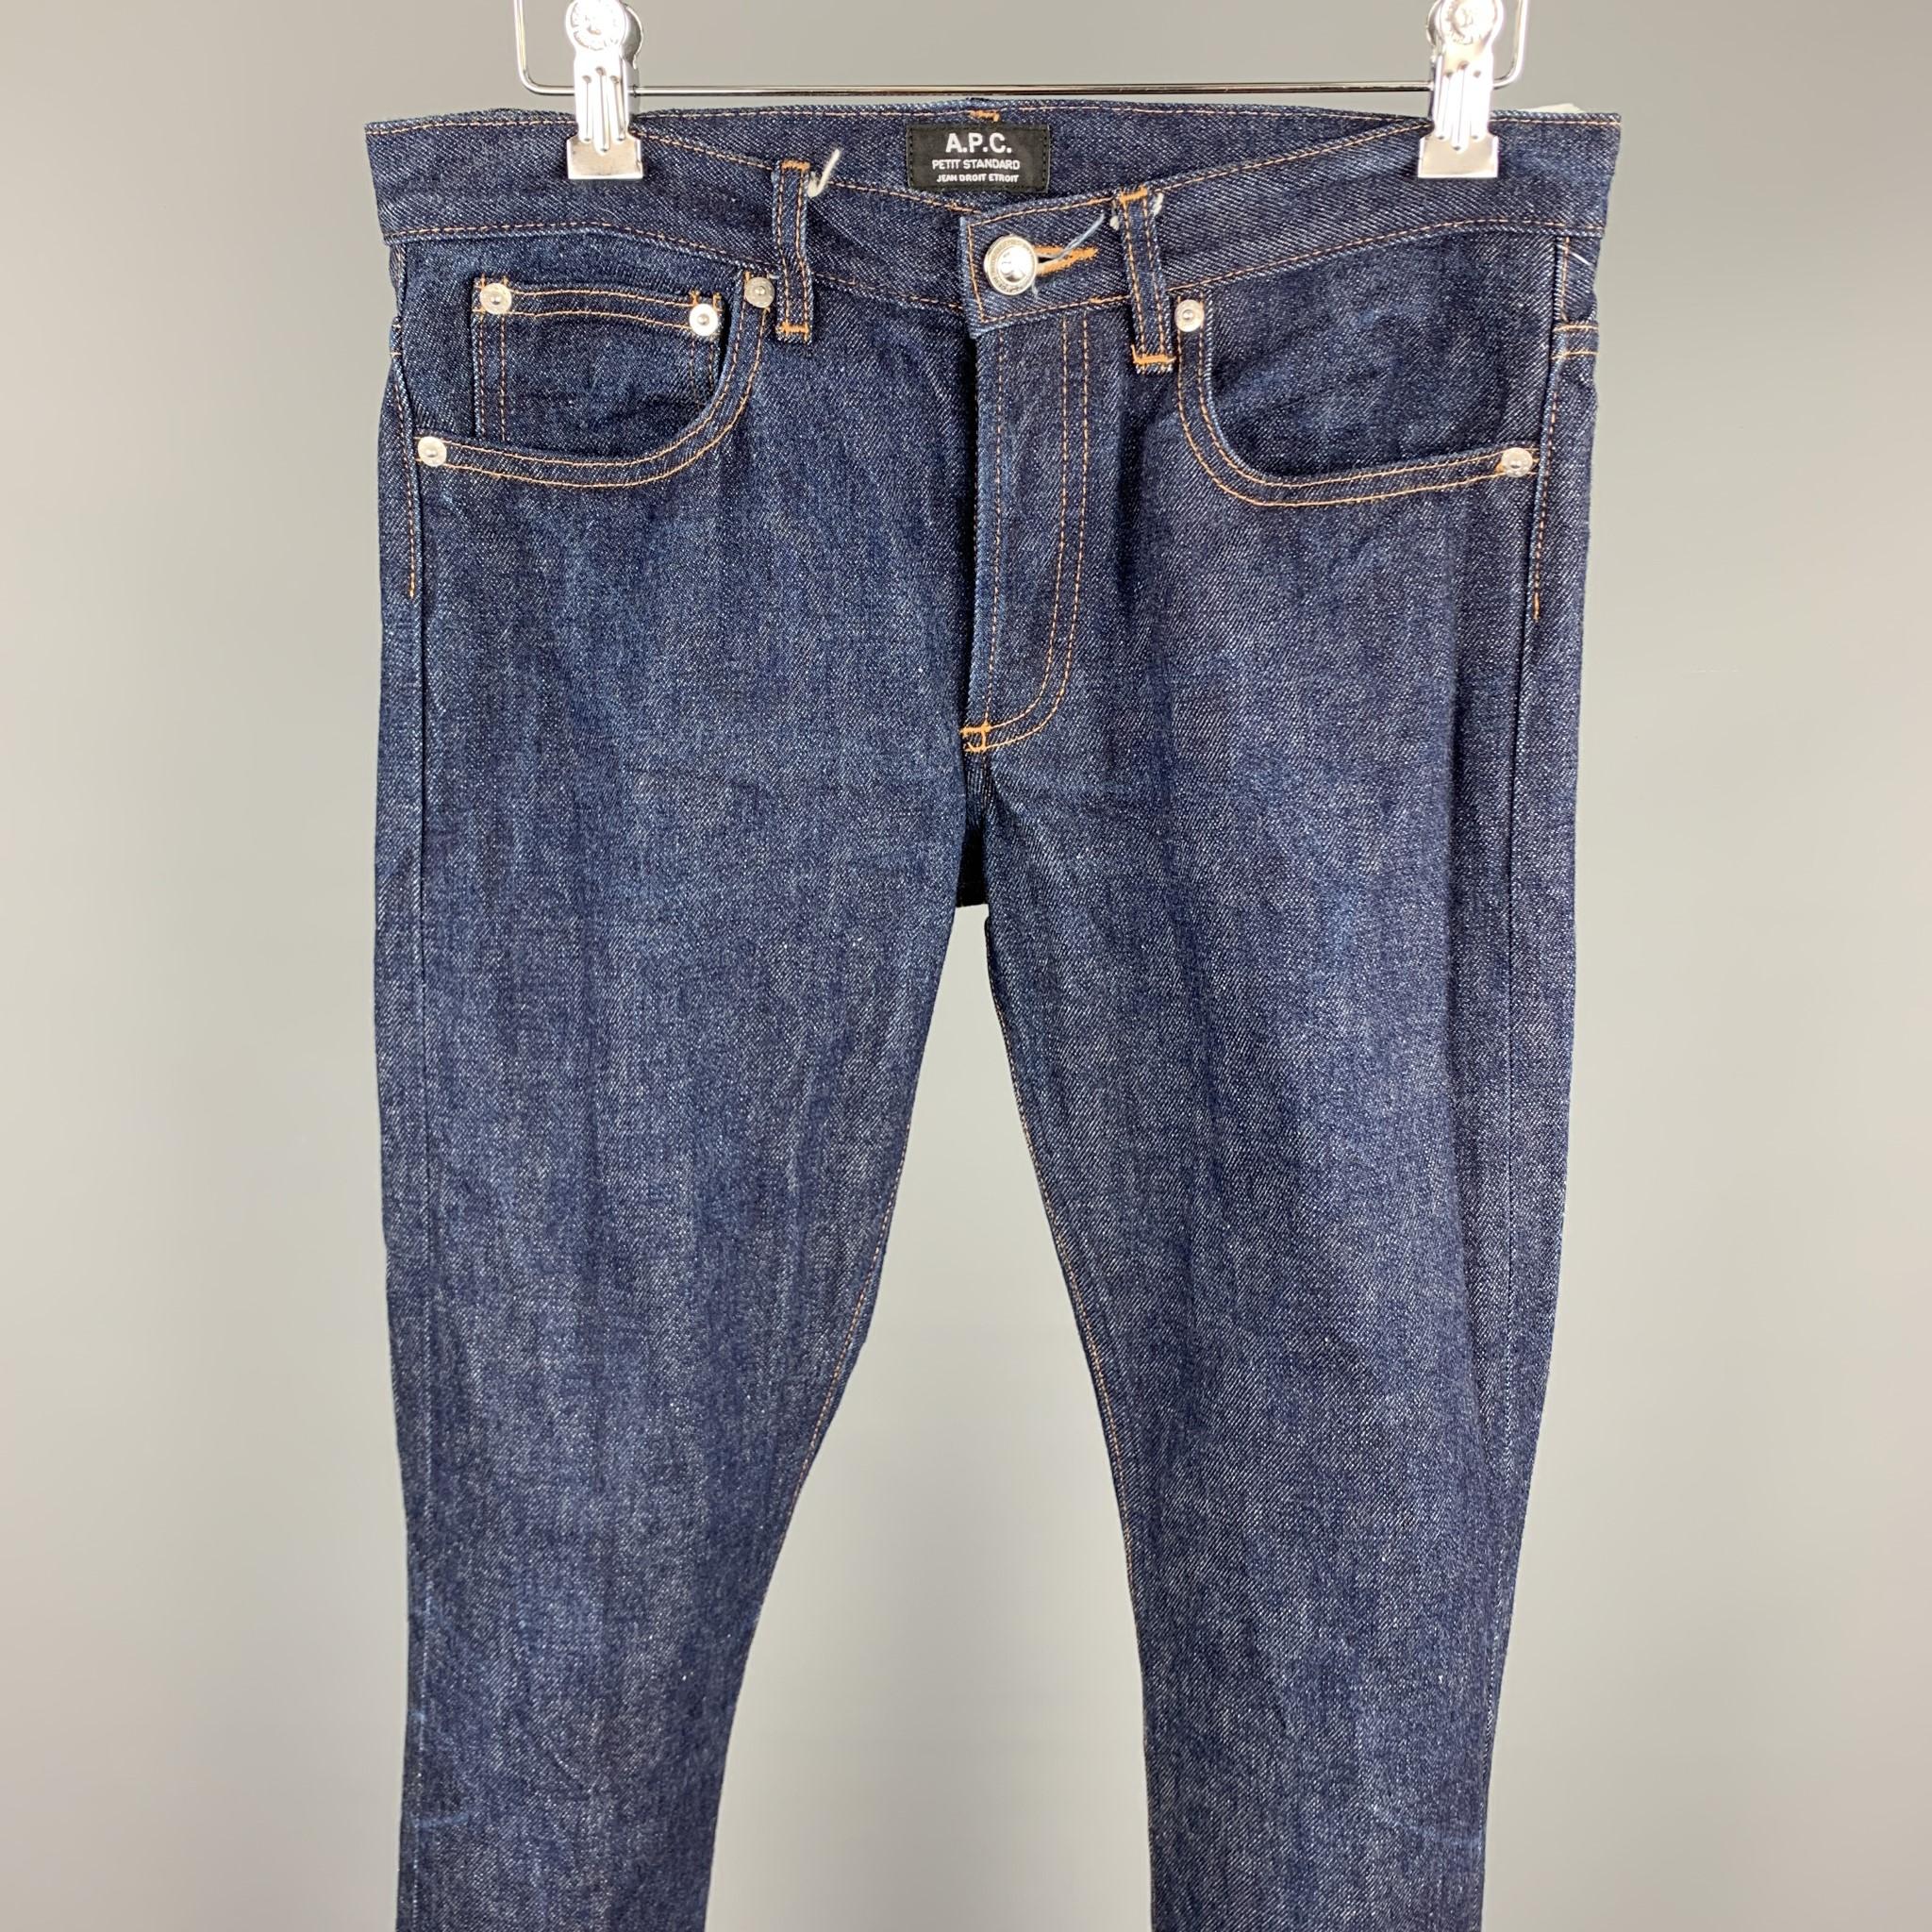 A.P.C jeans comes in a indigo denim featuring a slim fit, contrast stitching, and a button fly closure. 

Very Good Pre-Owned Condition.
Marked: 28

Measurements:

Waist: 30 in. 
Rise: 8 in. 
Inseam: 30 in. 